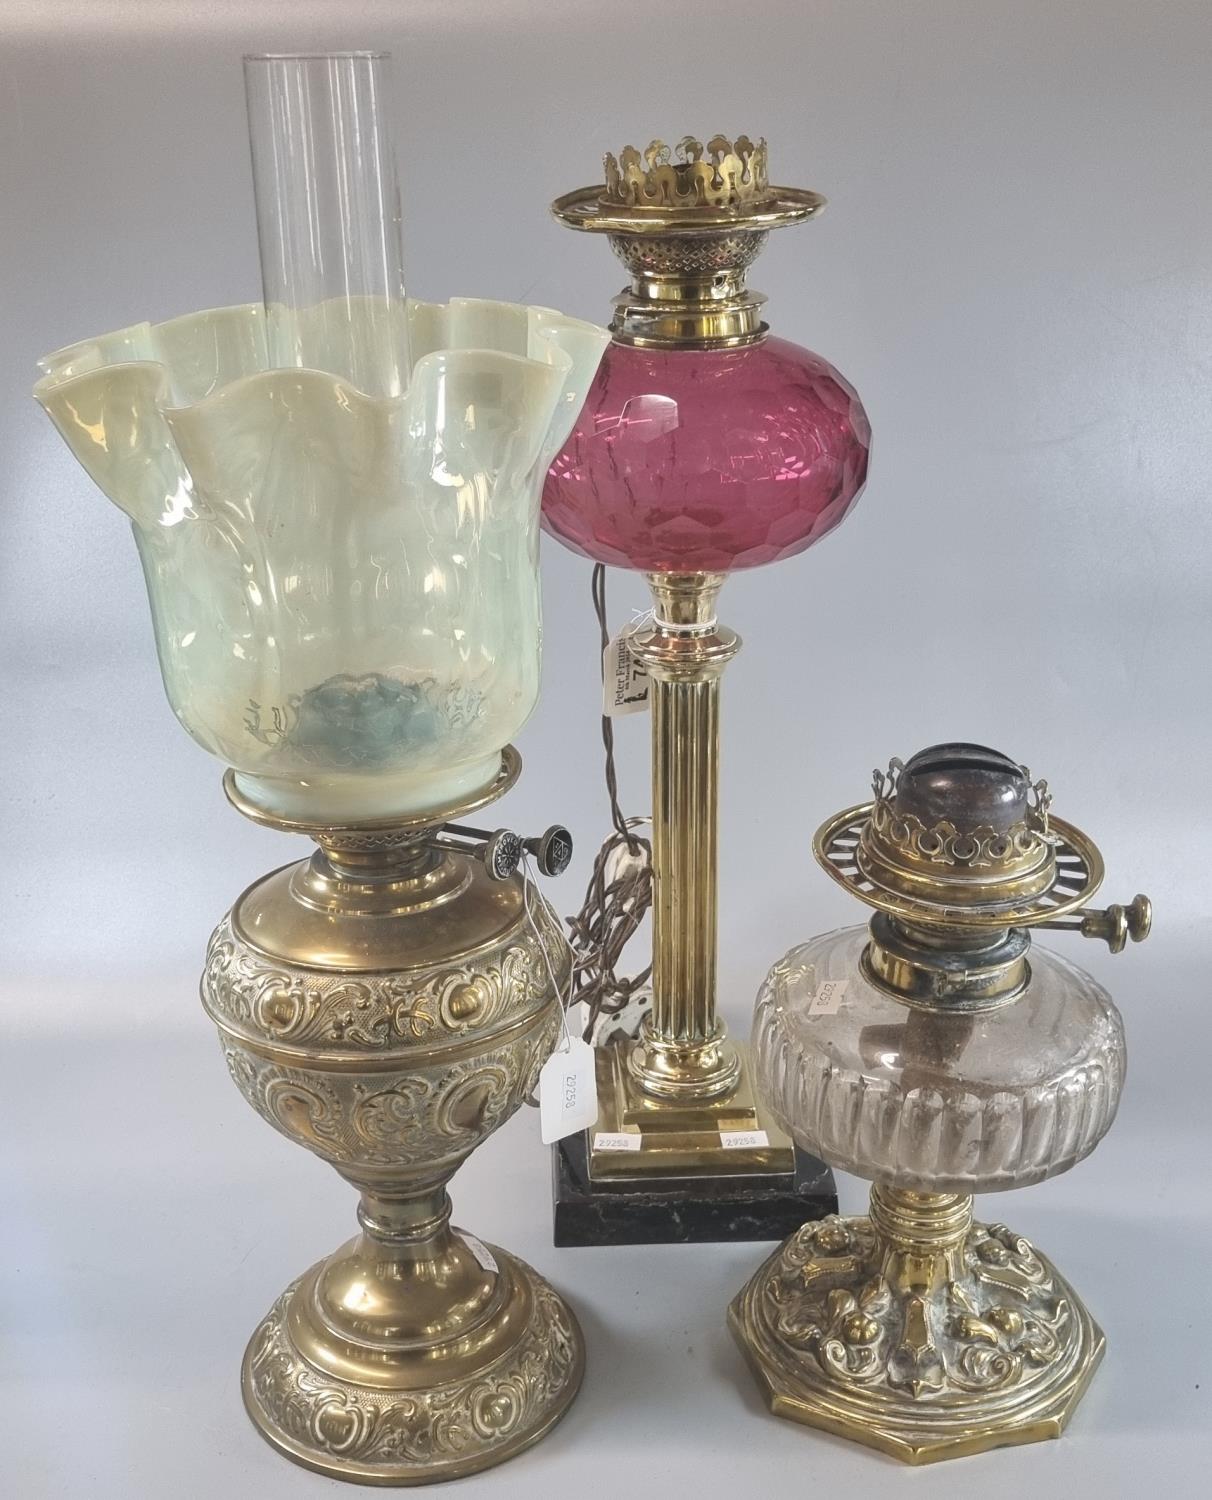 Early 20th century double oil burner lamp with frilled glass shade on a brass reservoir and base